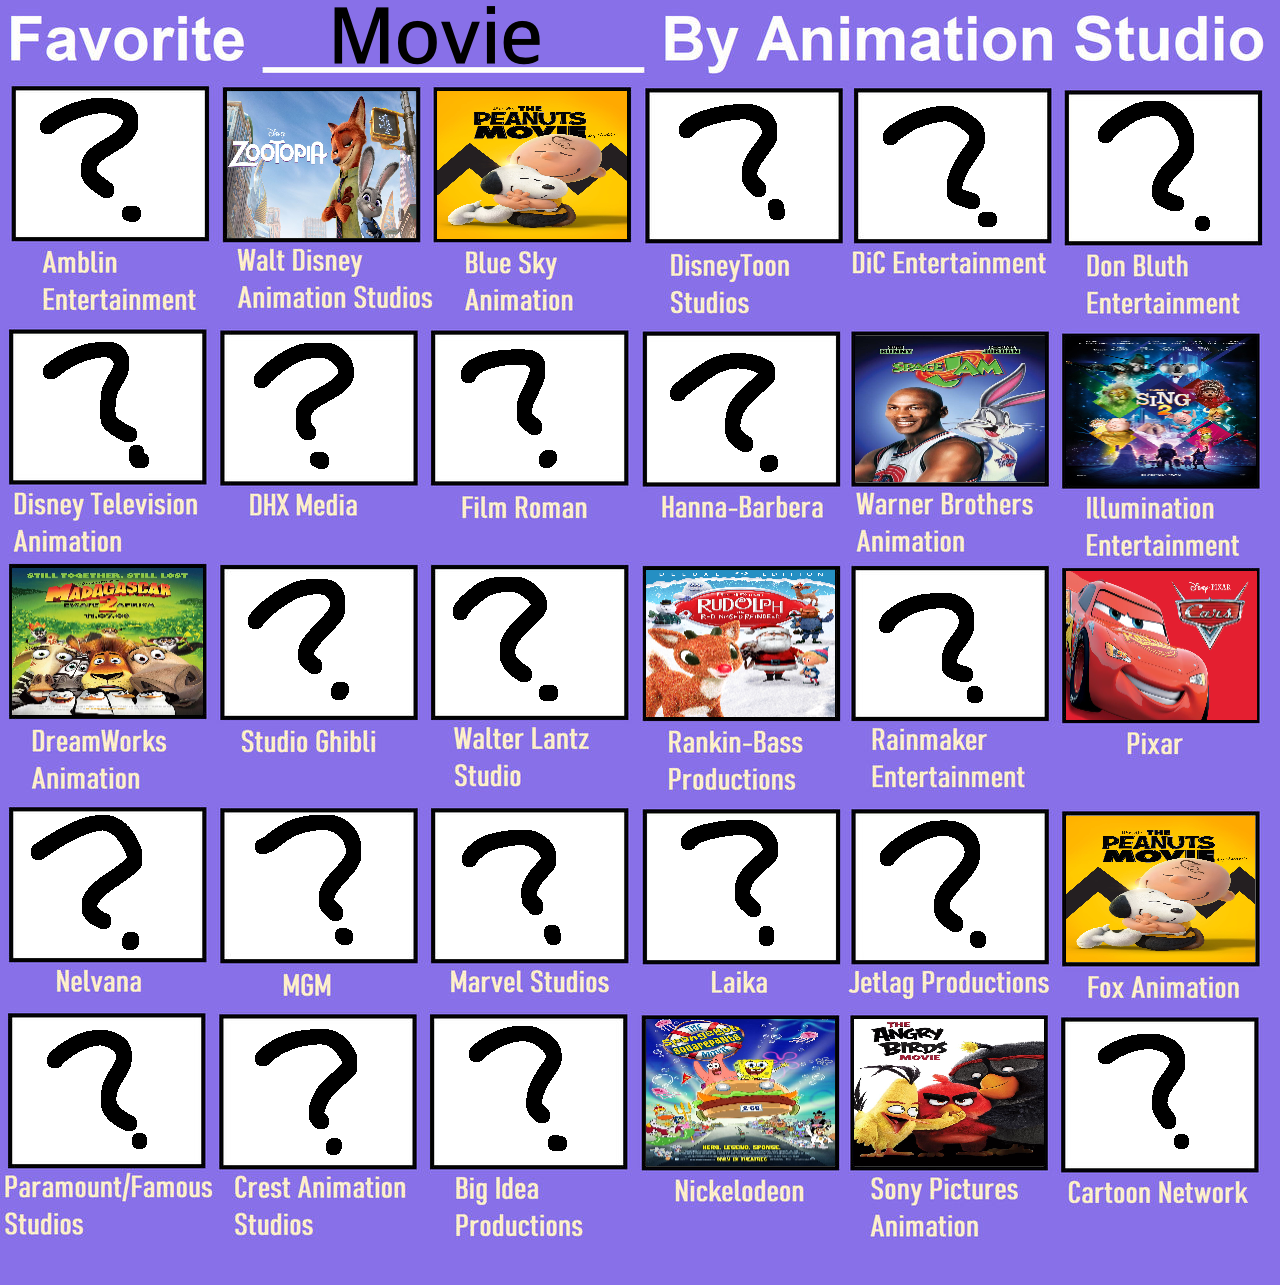 10 Movies That Would Be Better In Animation - Fudge Animation Studios